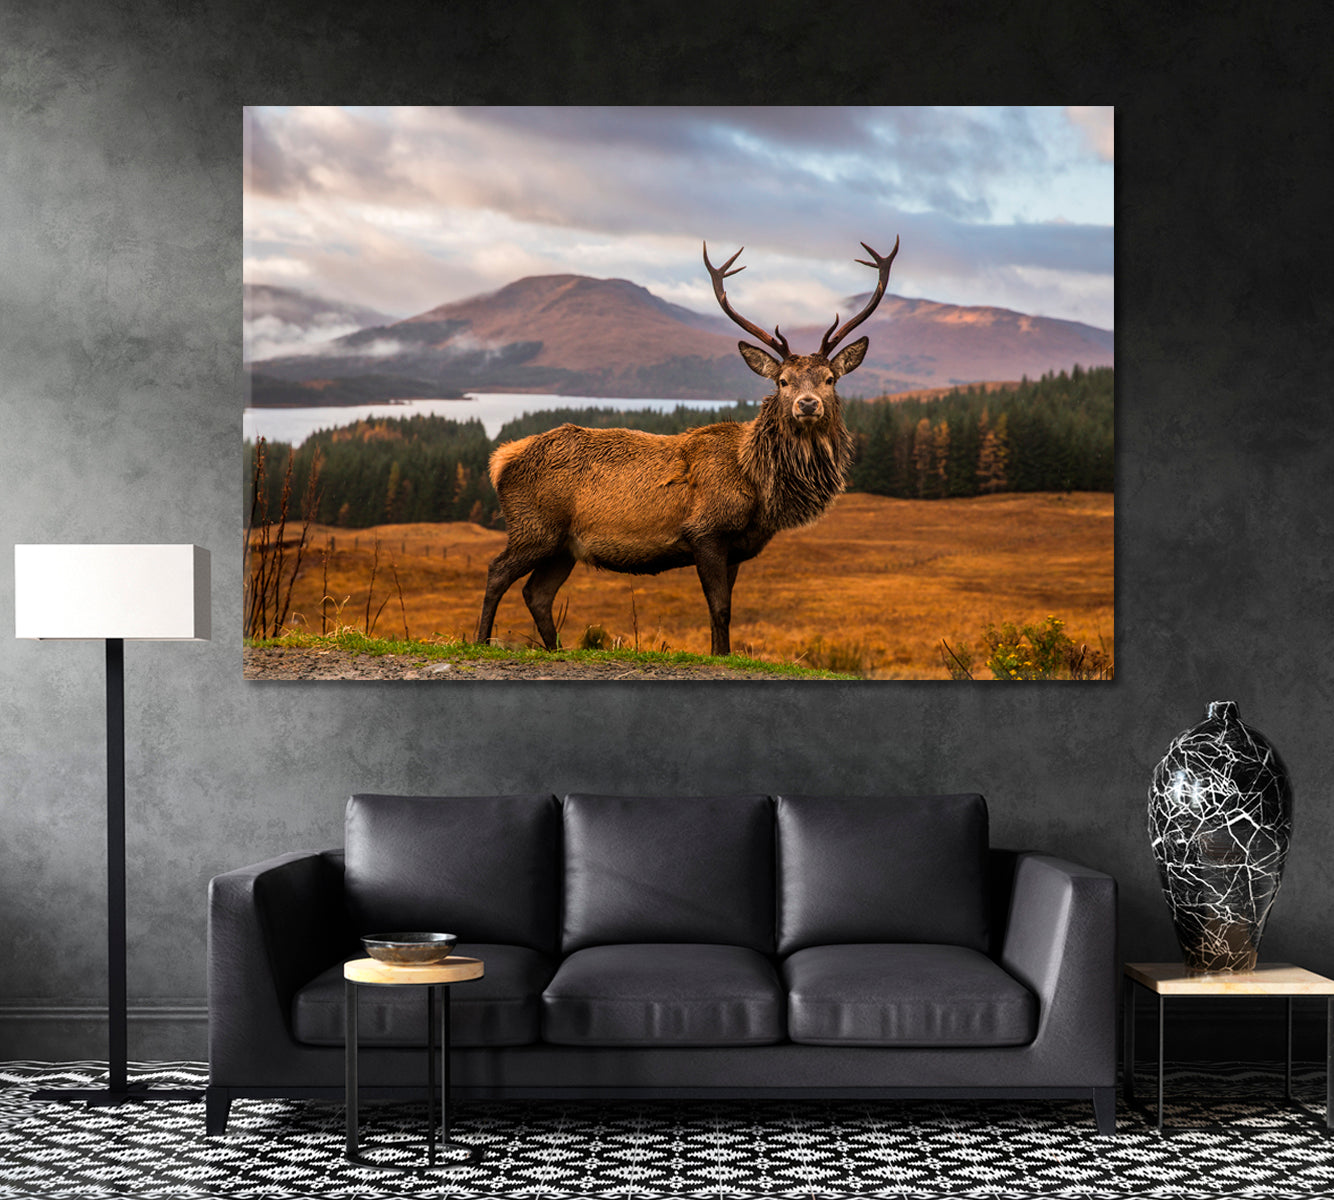 Wild Scottish Stag in Natural Habitat Canvas Print ArtLexy 1 Panel 24"x16" inches 